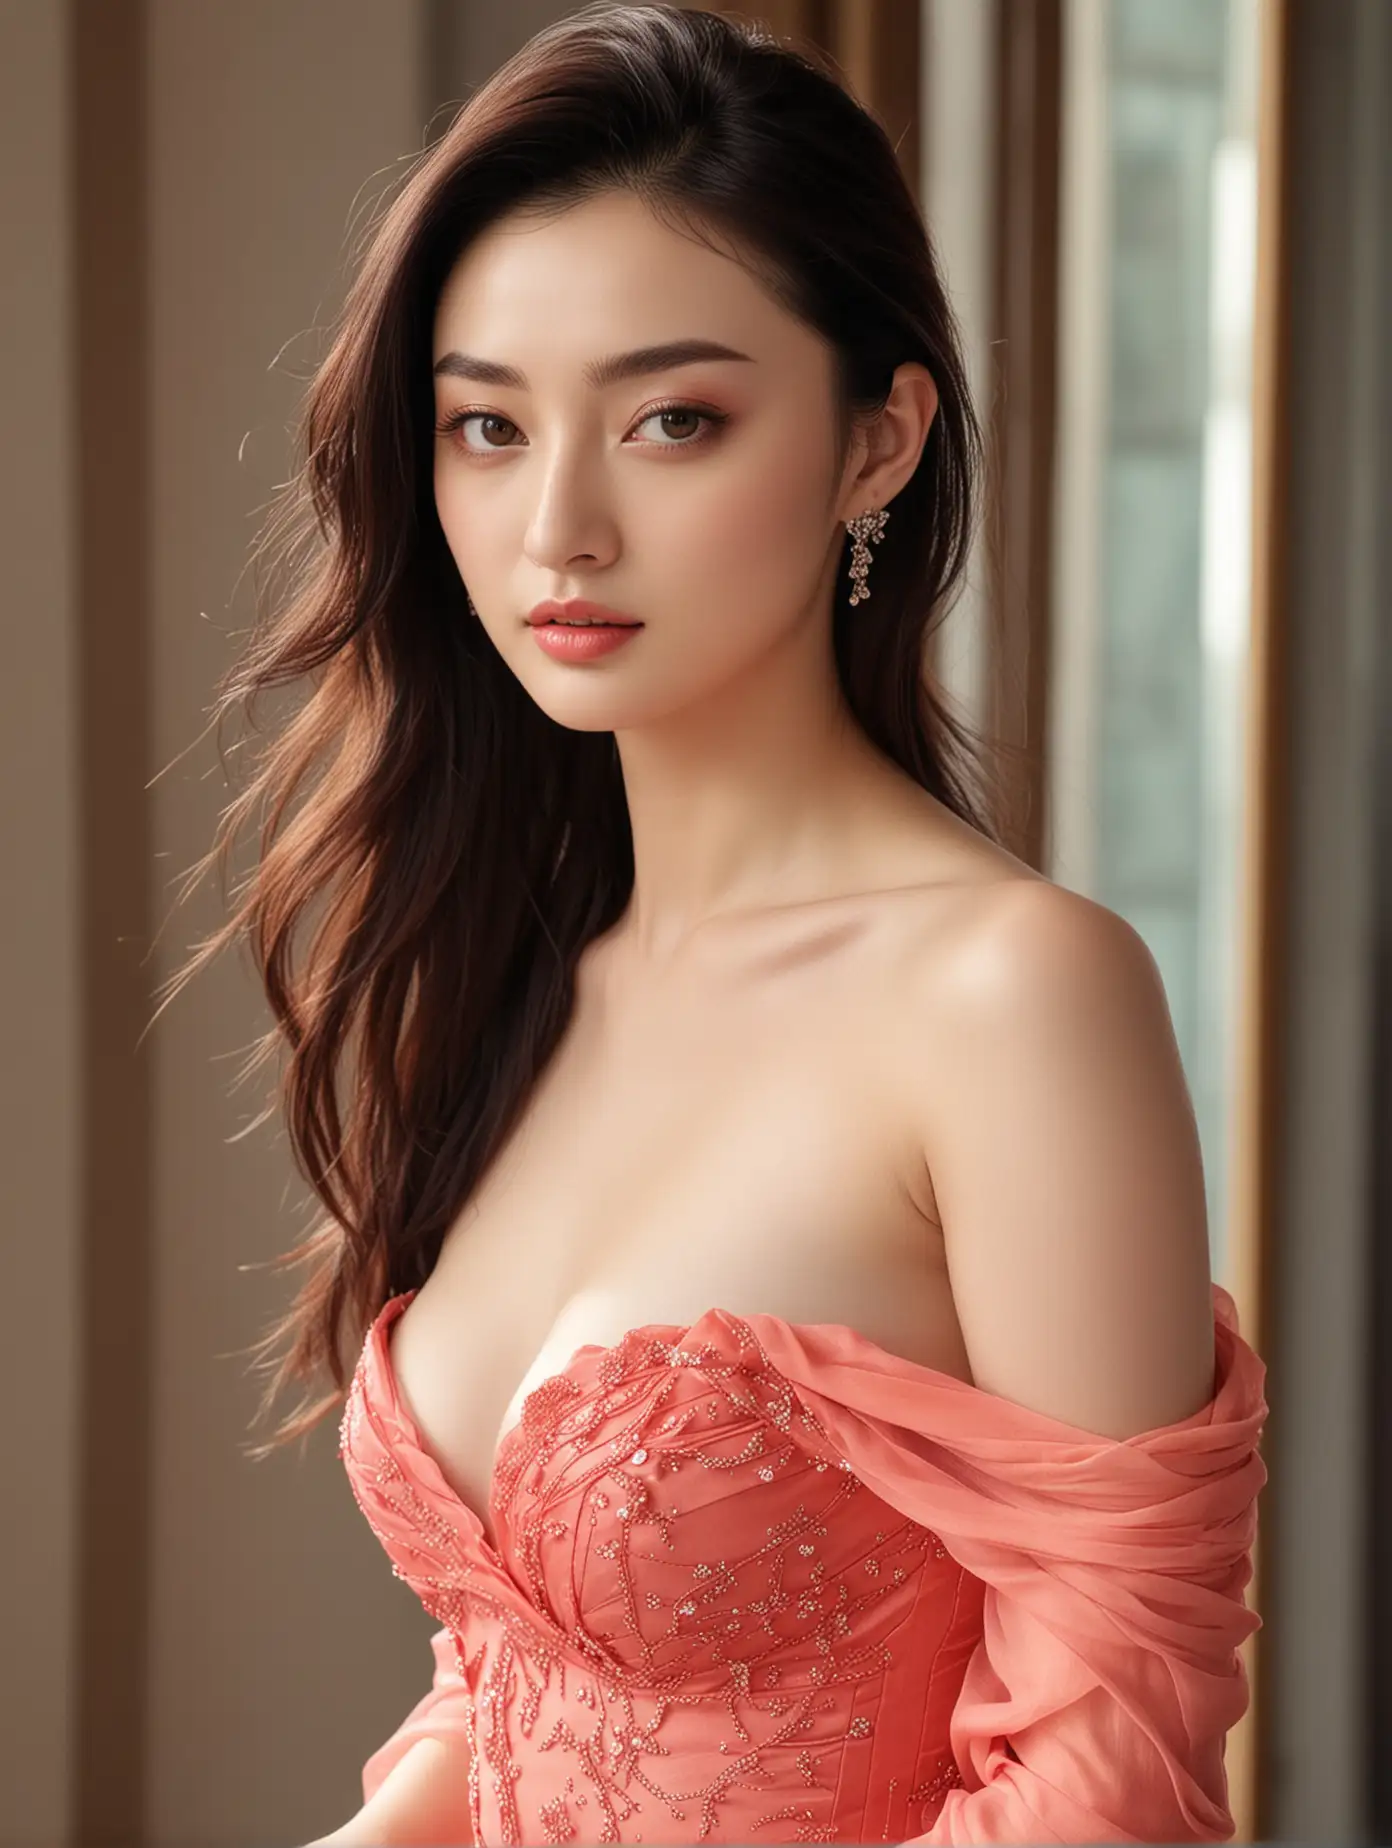 Nude Jing Tian Poses Gracefully in Vibrant Penthouse Ambiance